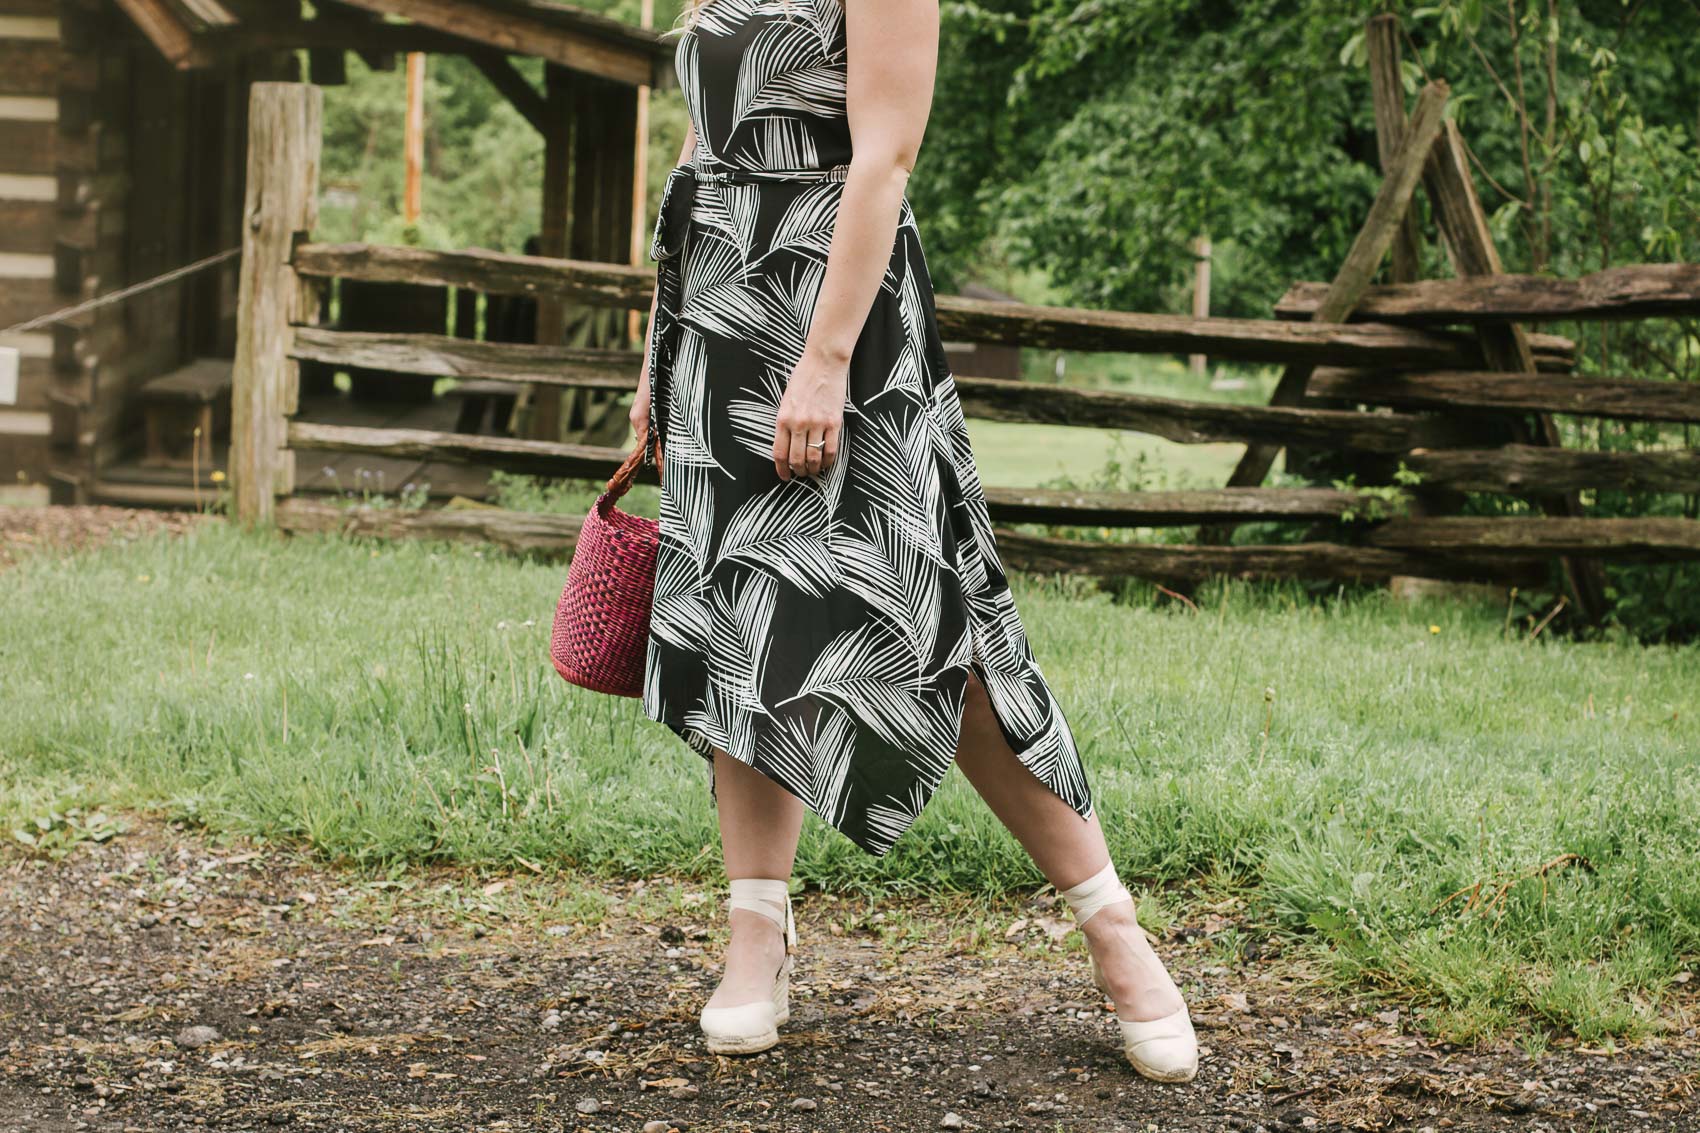 Allyn Lewis of The Gem shares a casual summer outfit in a classy black and white palm print dress. 